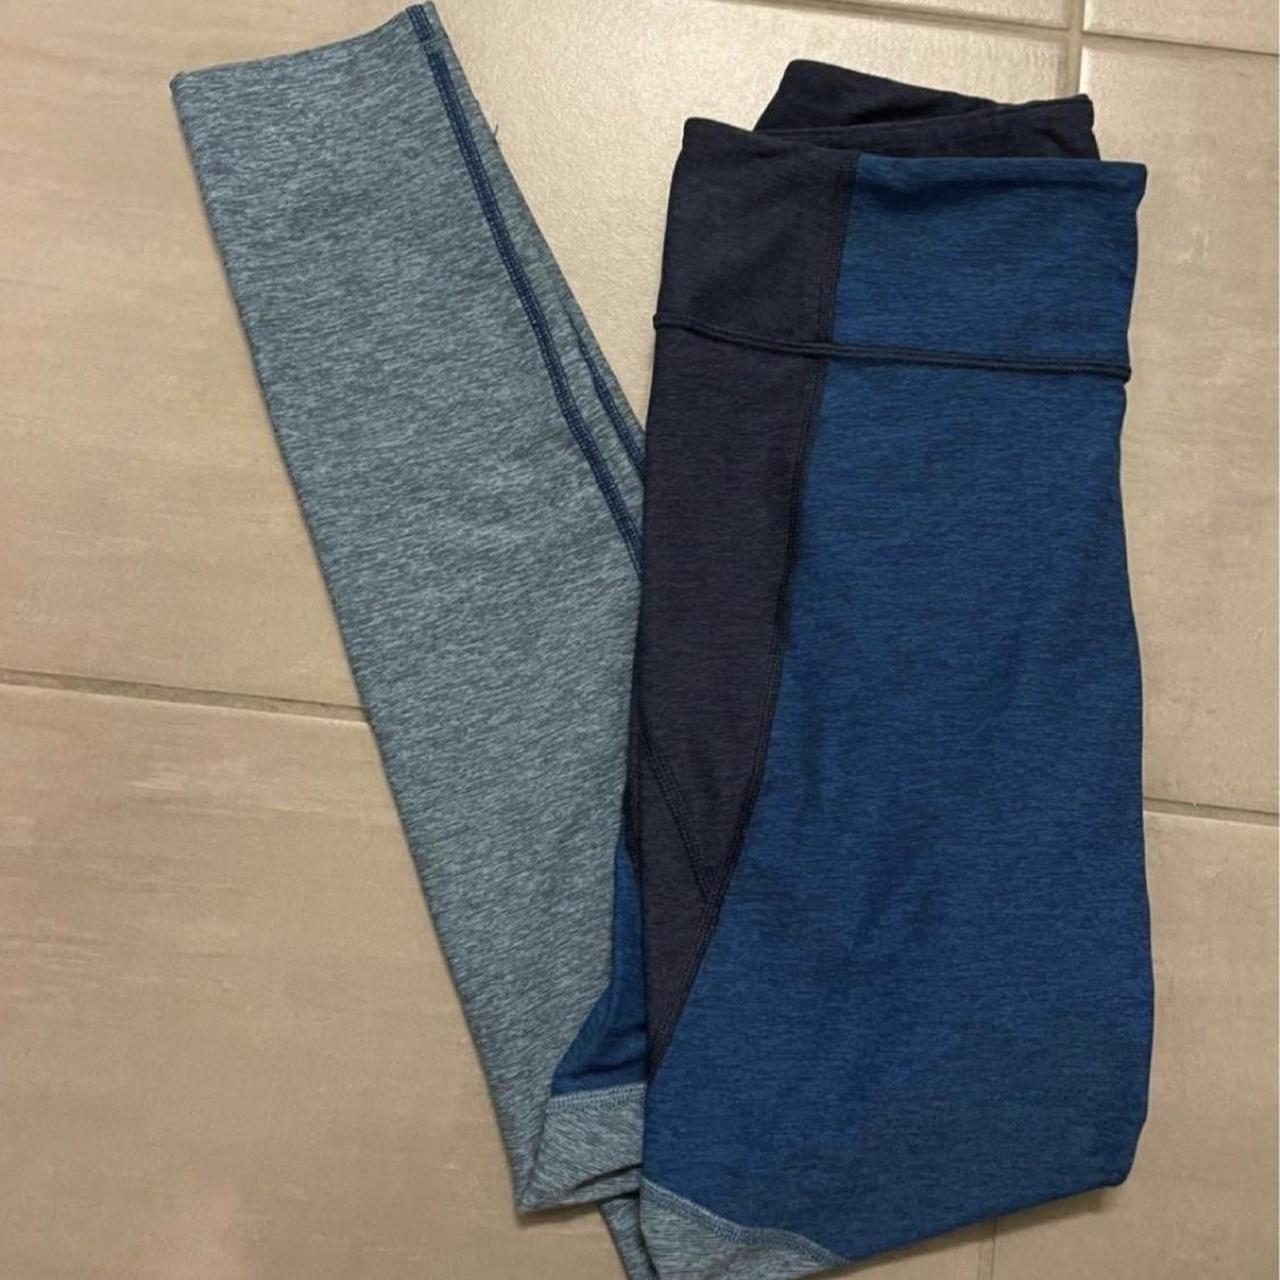 Outdoor voices 7/8 warmup leggings in navy. Size XS. - Depop